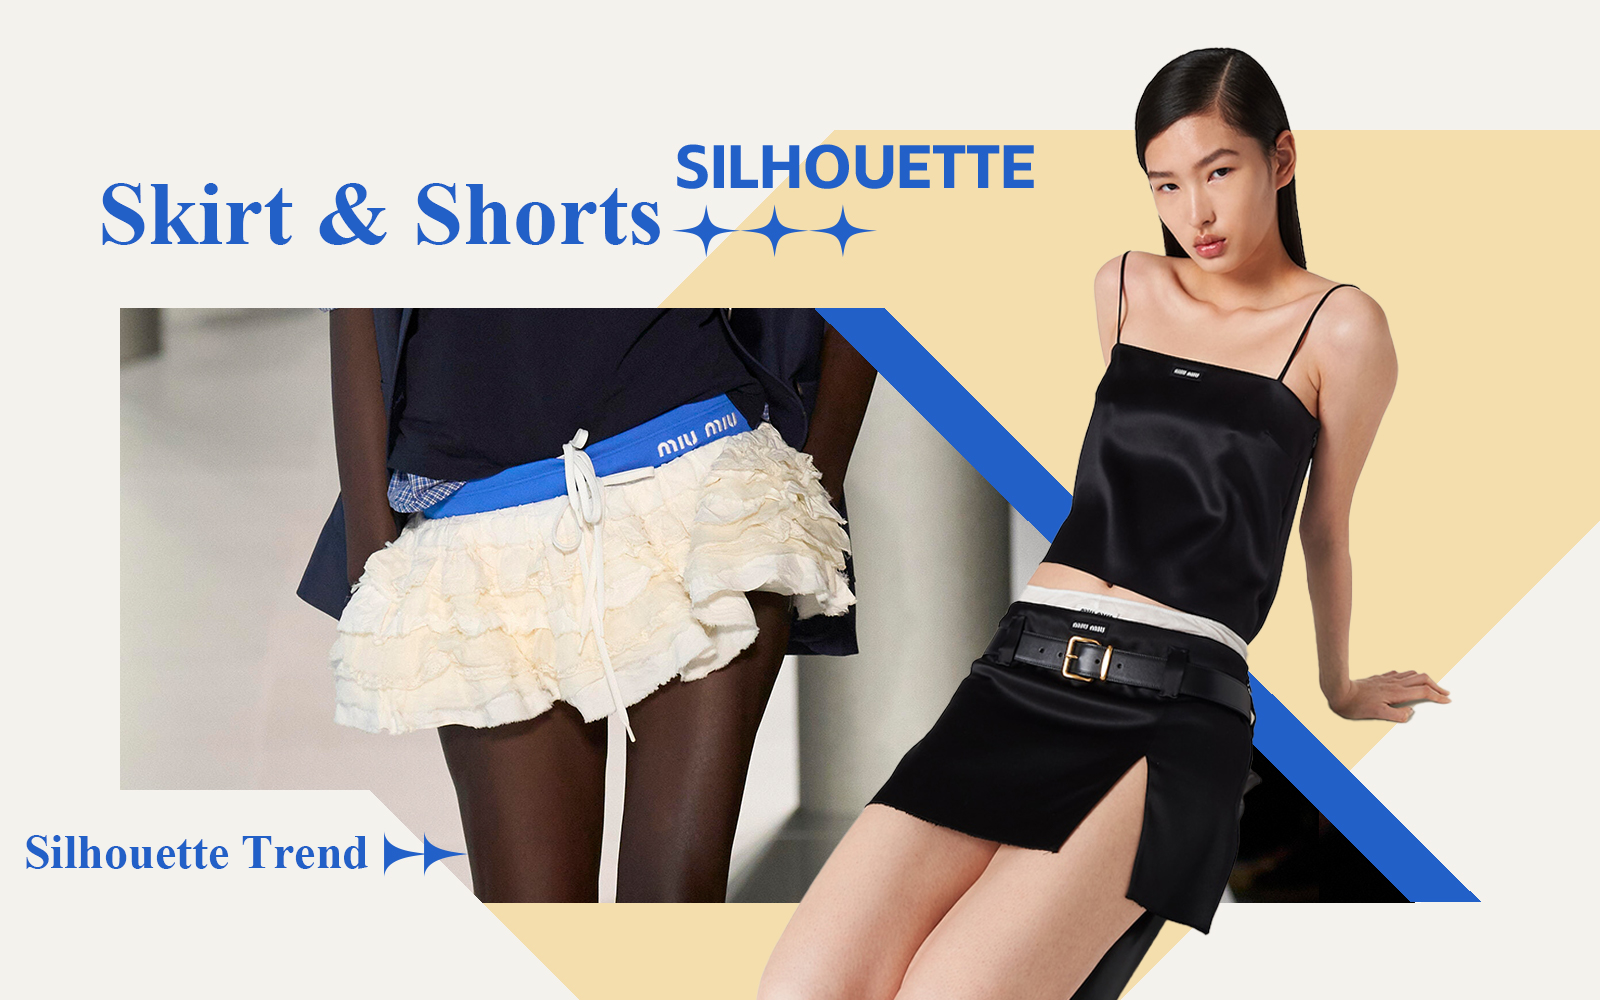 Miu Miu Style -- The Silhouette Trend for Women's Skirt & Shorts